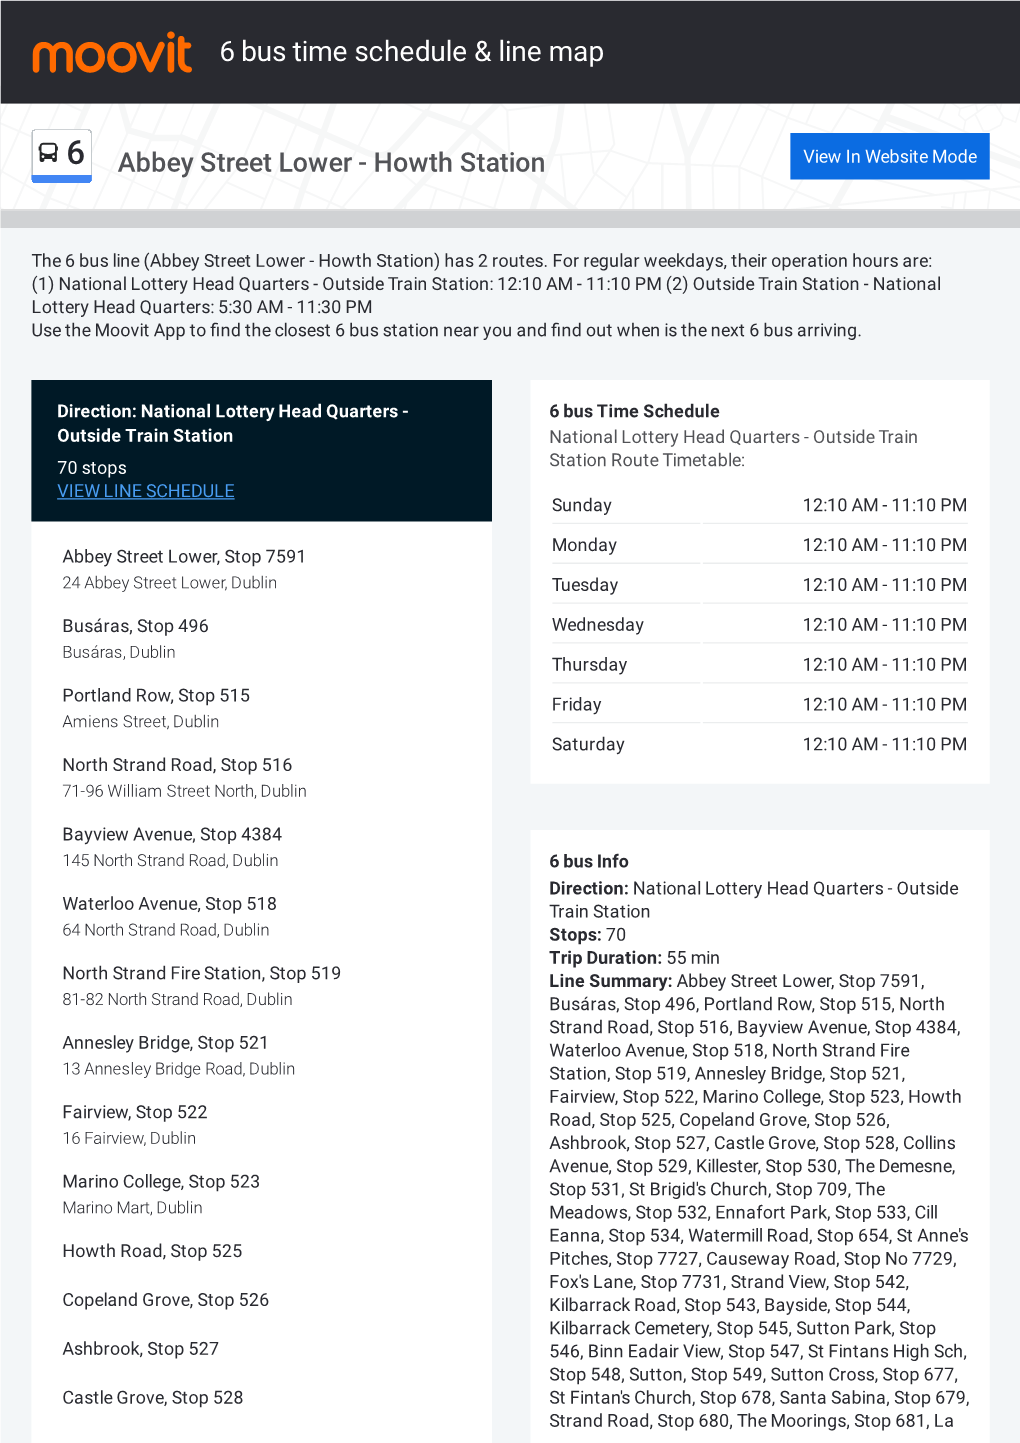 6 Bus Time Schedule & Line Route